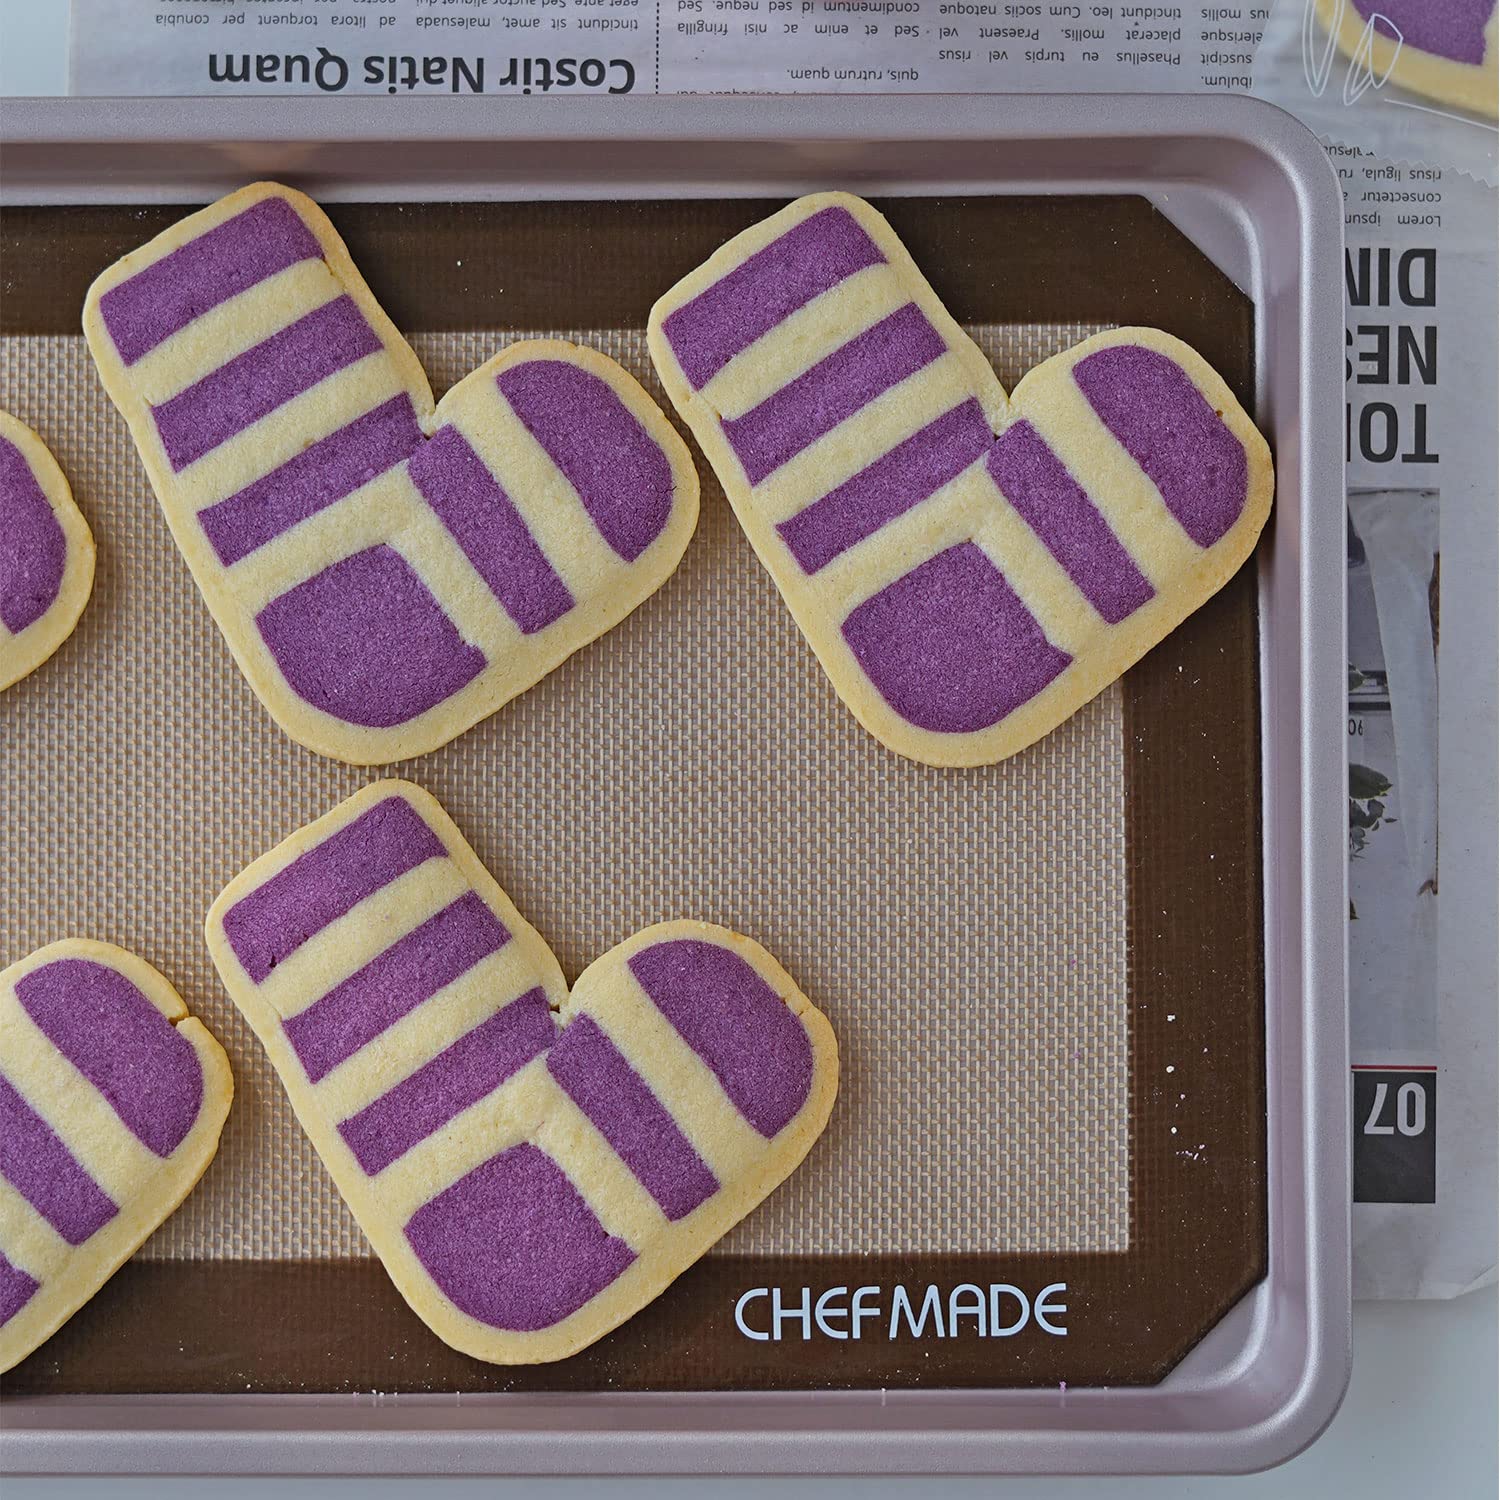 Silicone Baking Mat Set of 6 by Home Marketplace 